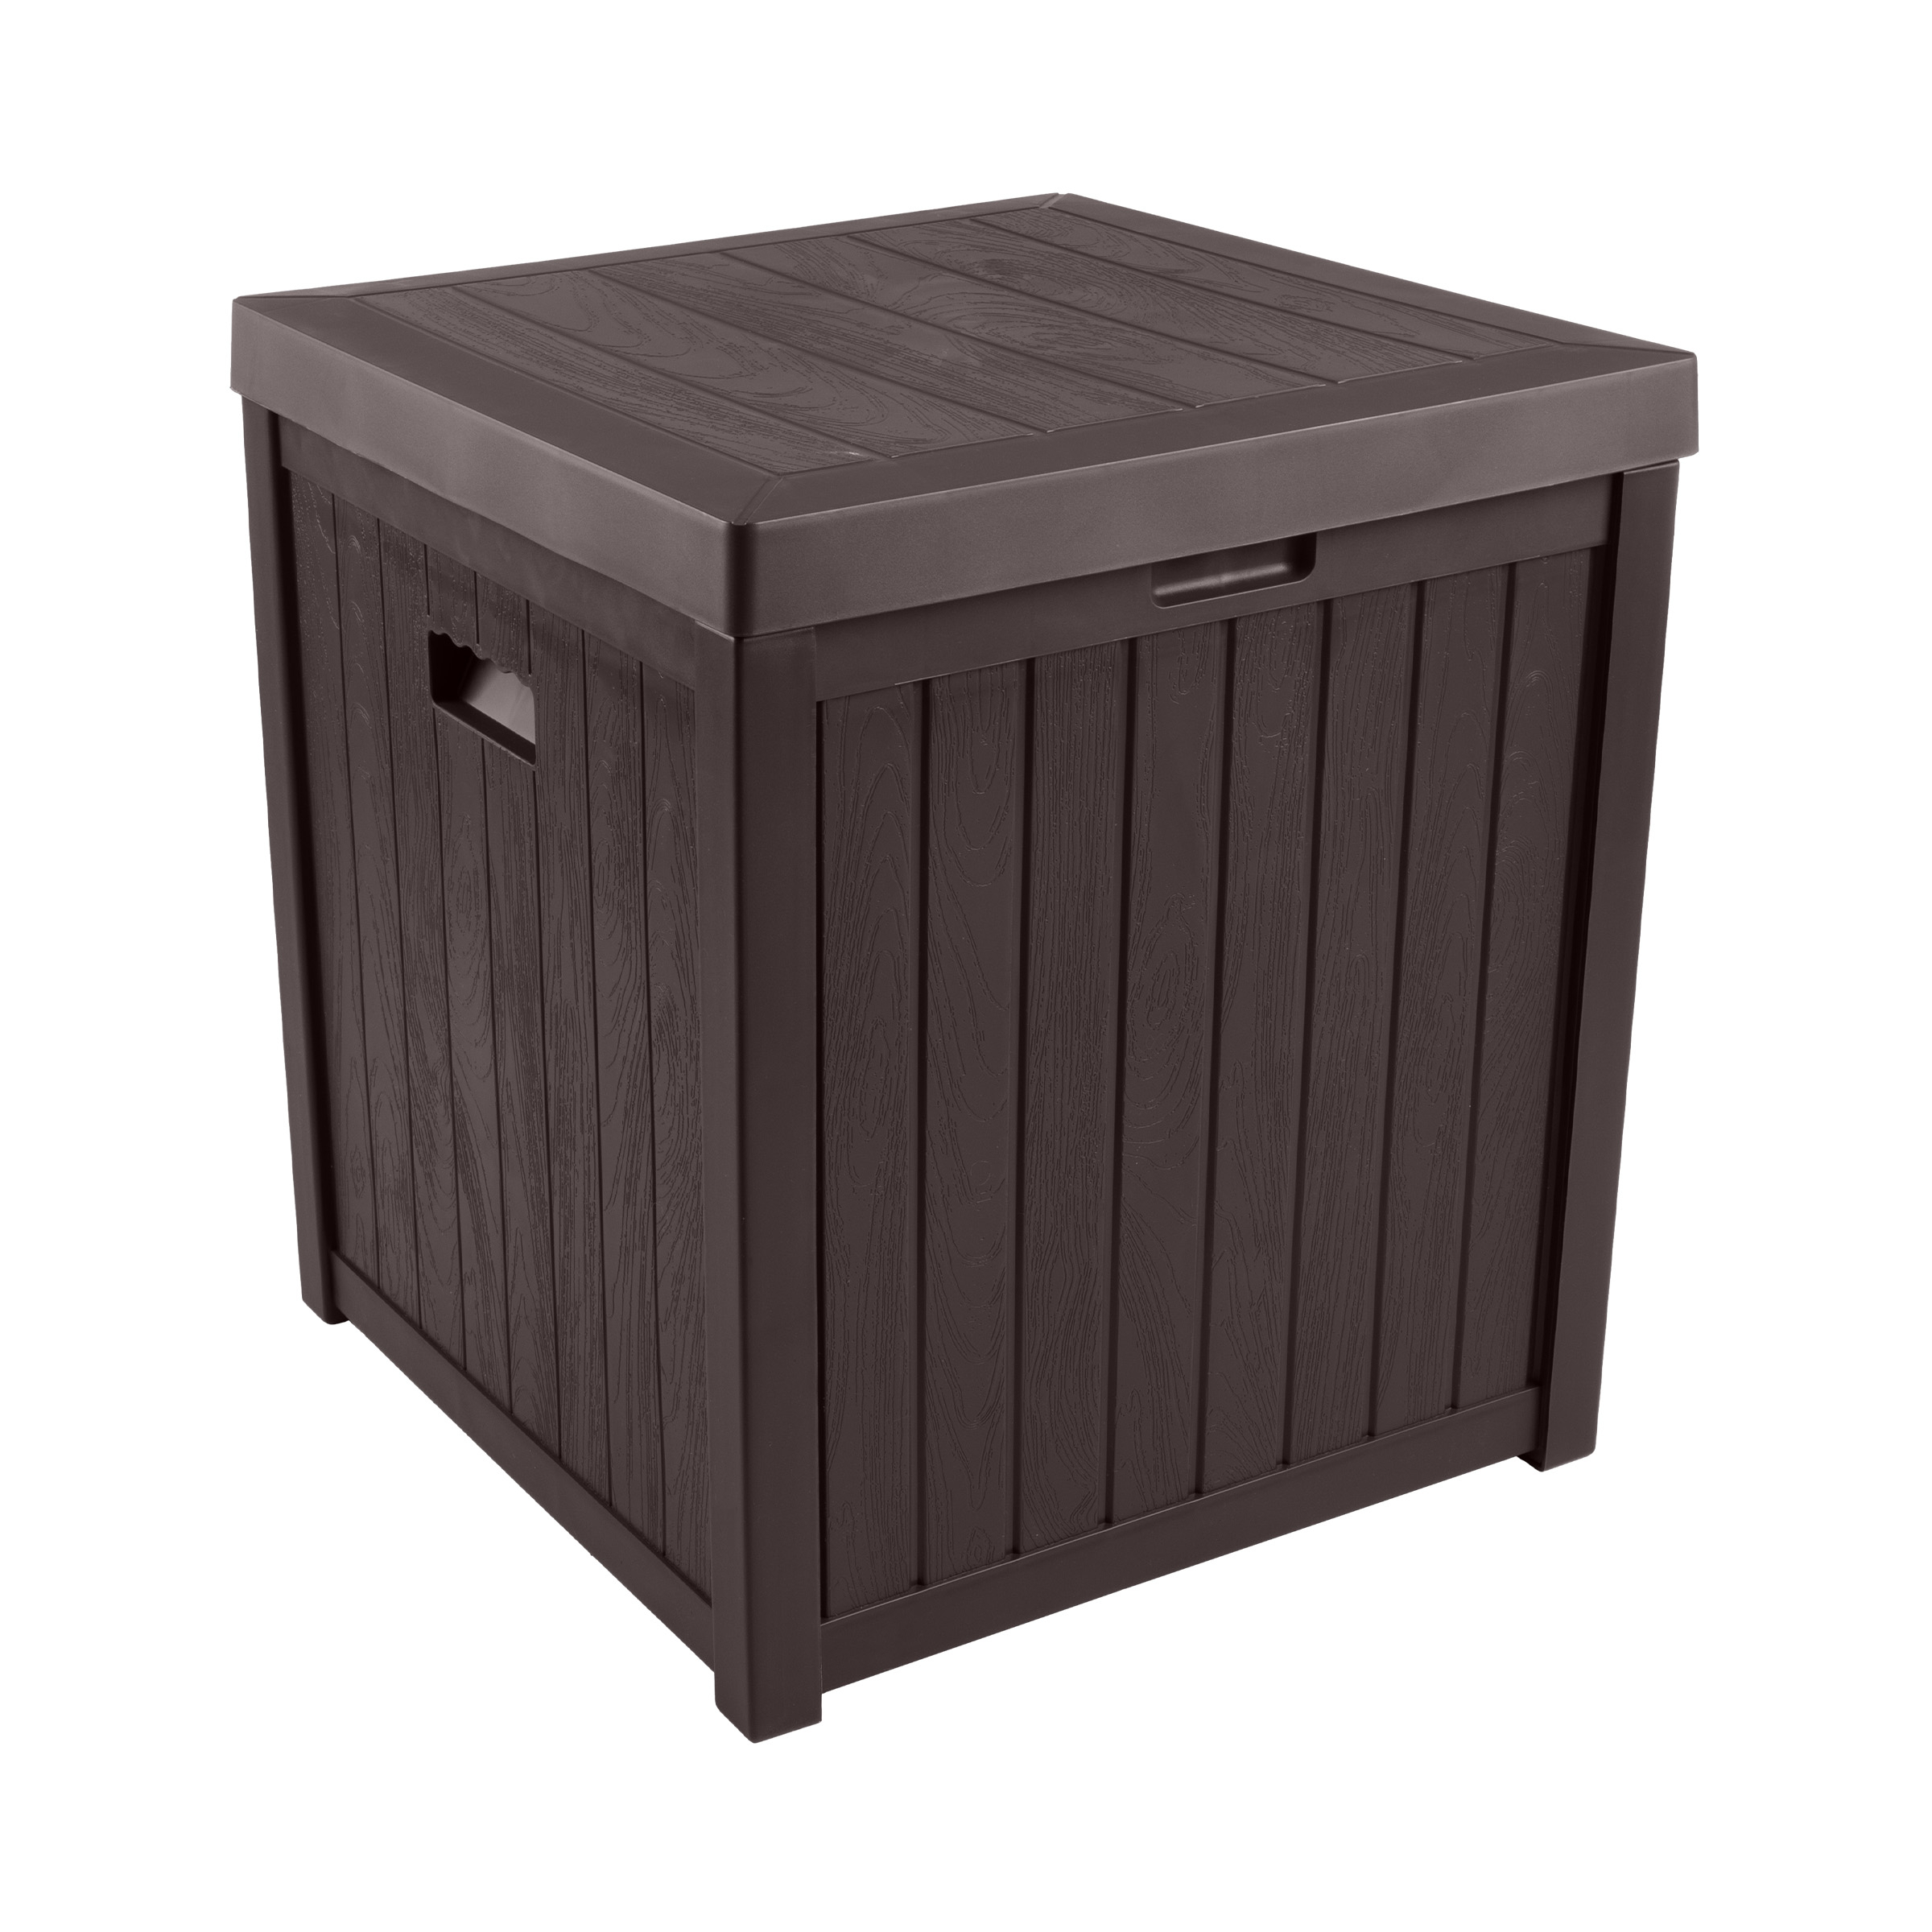 Outdoor Indoor 50 Gallon Storage Container Resin Deck Box 22 X 24 Inch - Brown